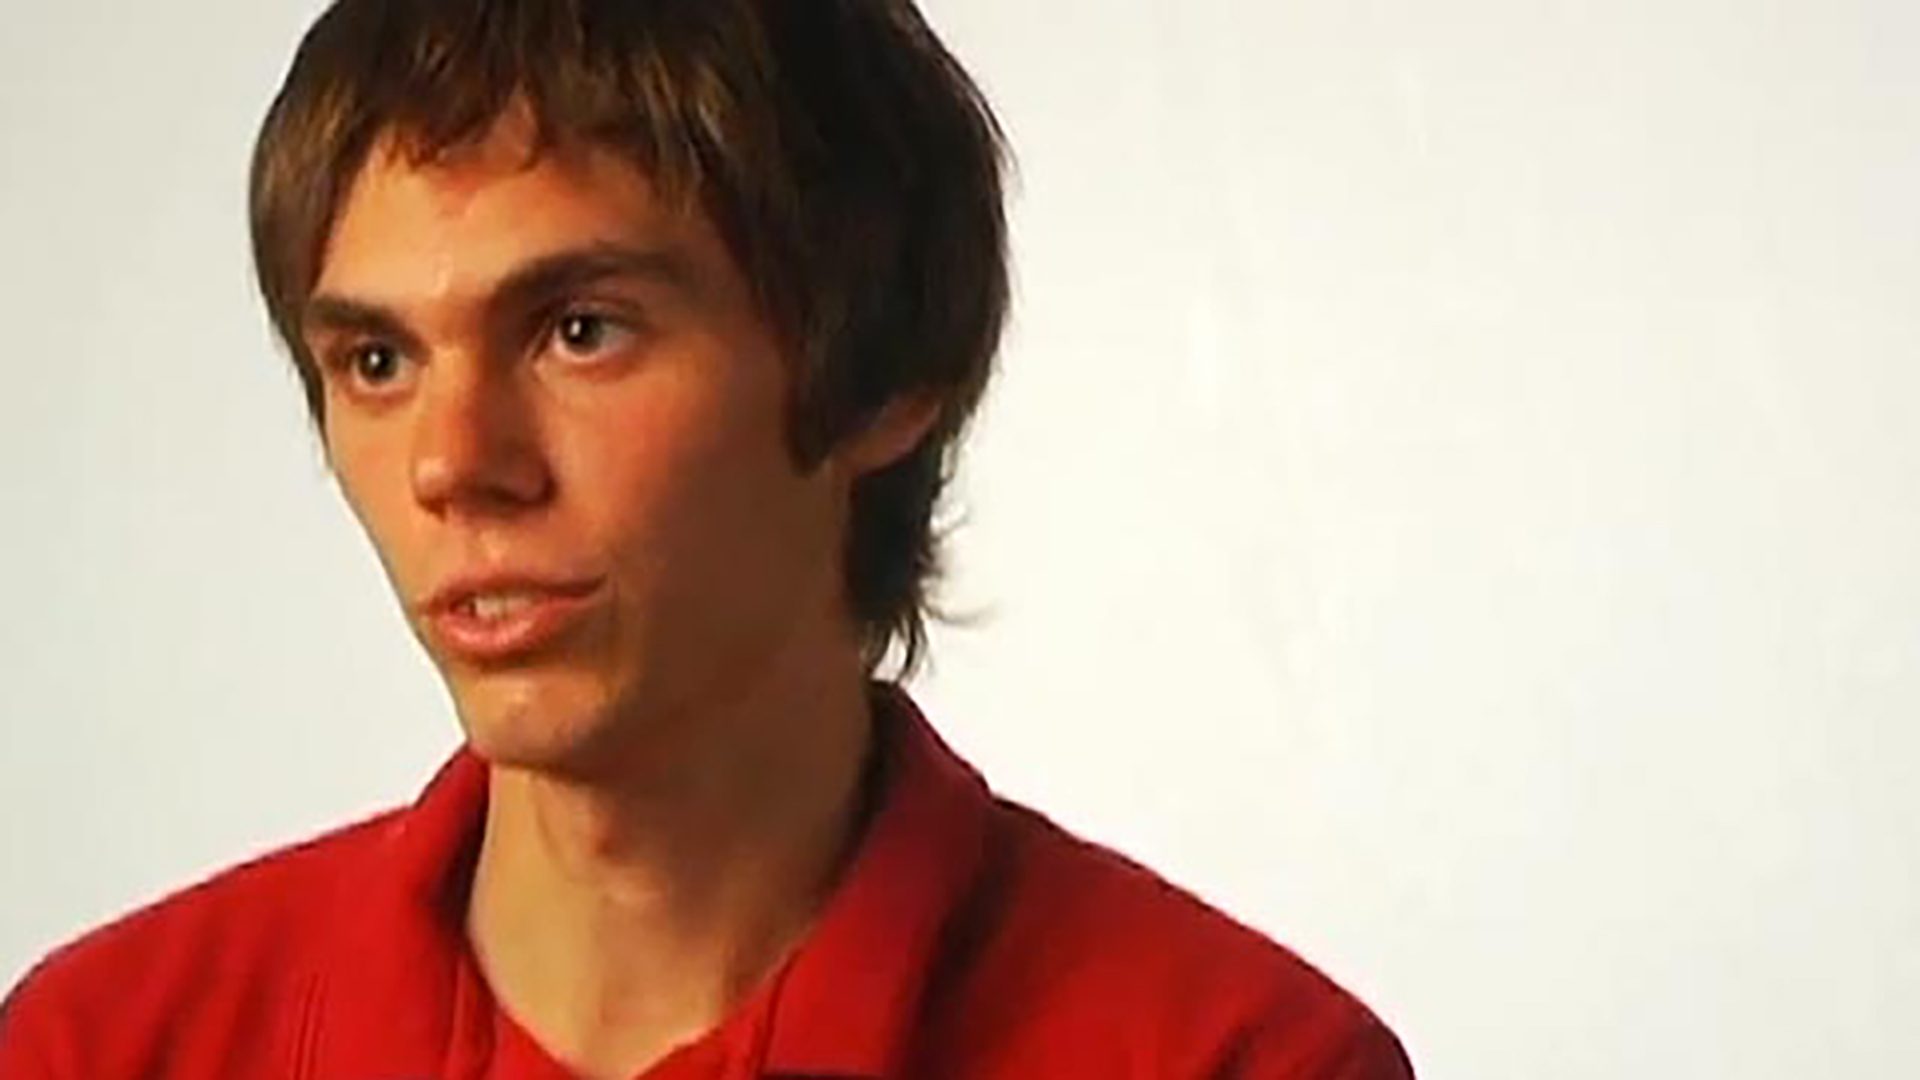 A young man wearing a red shirt against a white background